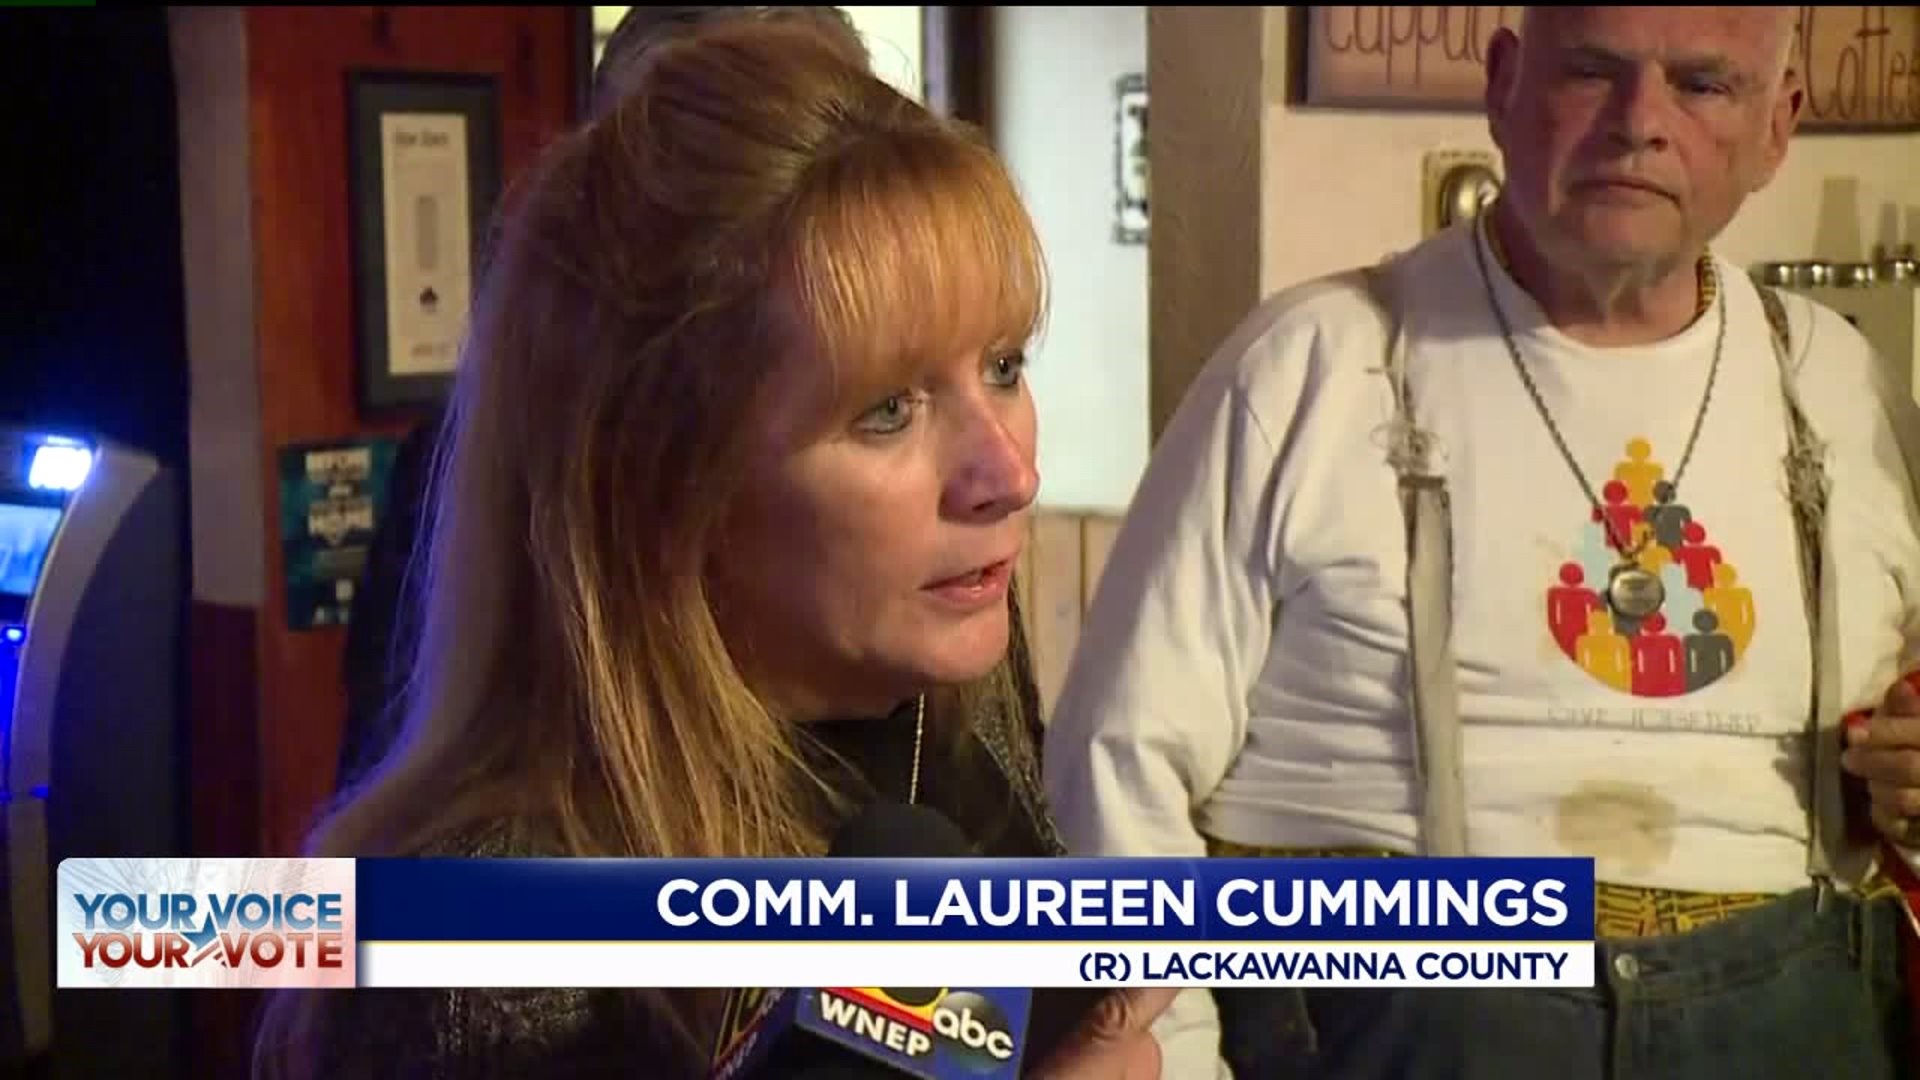 Gianetta, Chermak Unseat Cummings in Race for Lackawanna County Commissioner